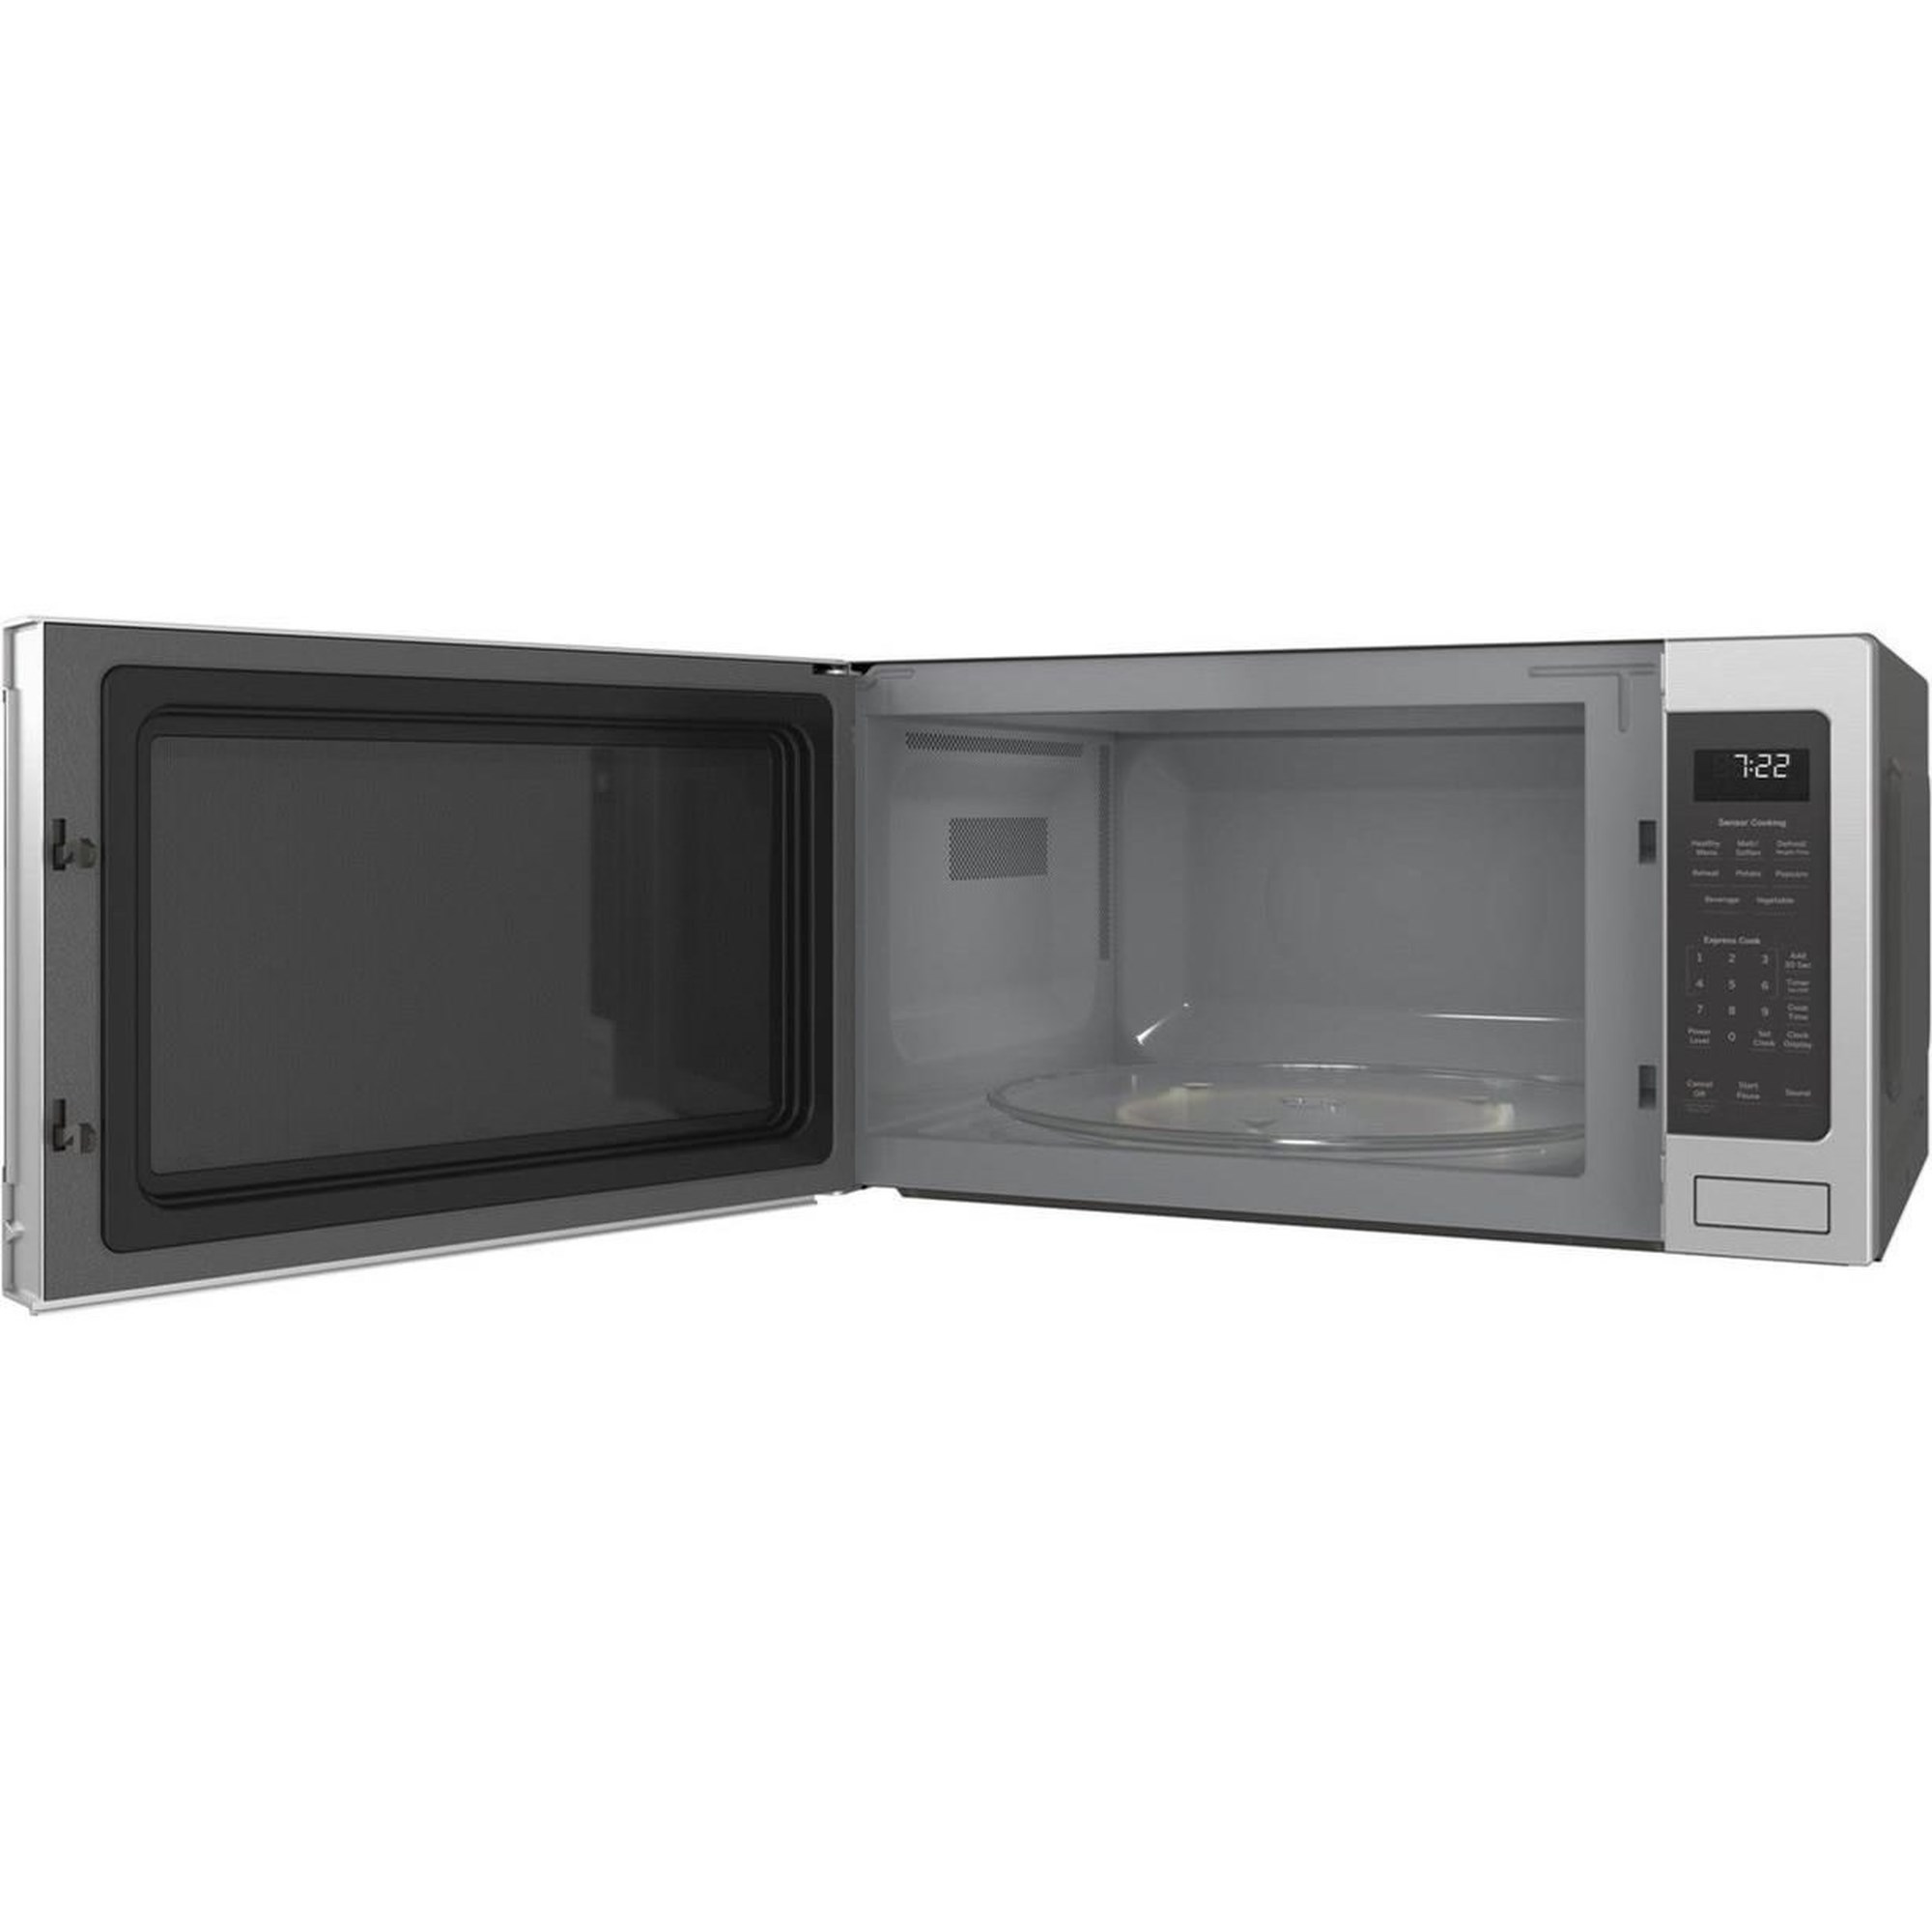 Whirlpool 0.5 cu. ft. Countertop Microwave Oven 